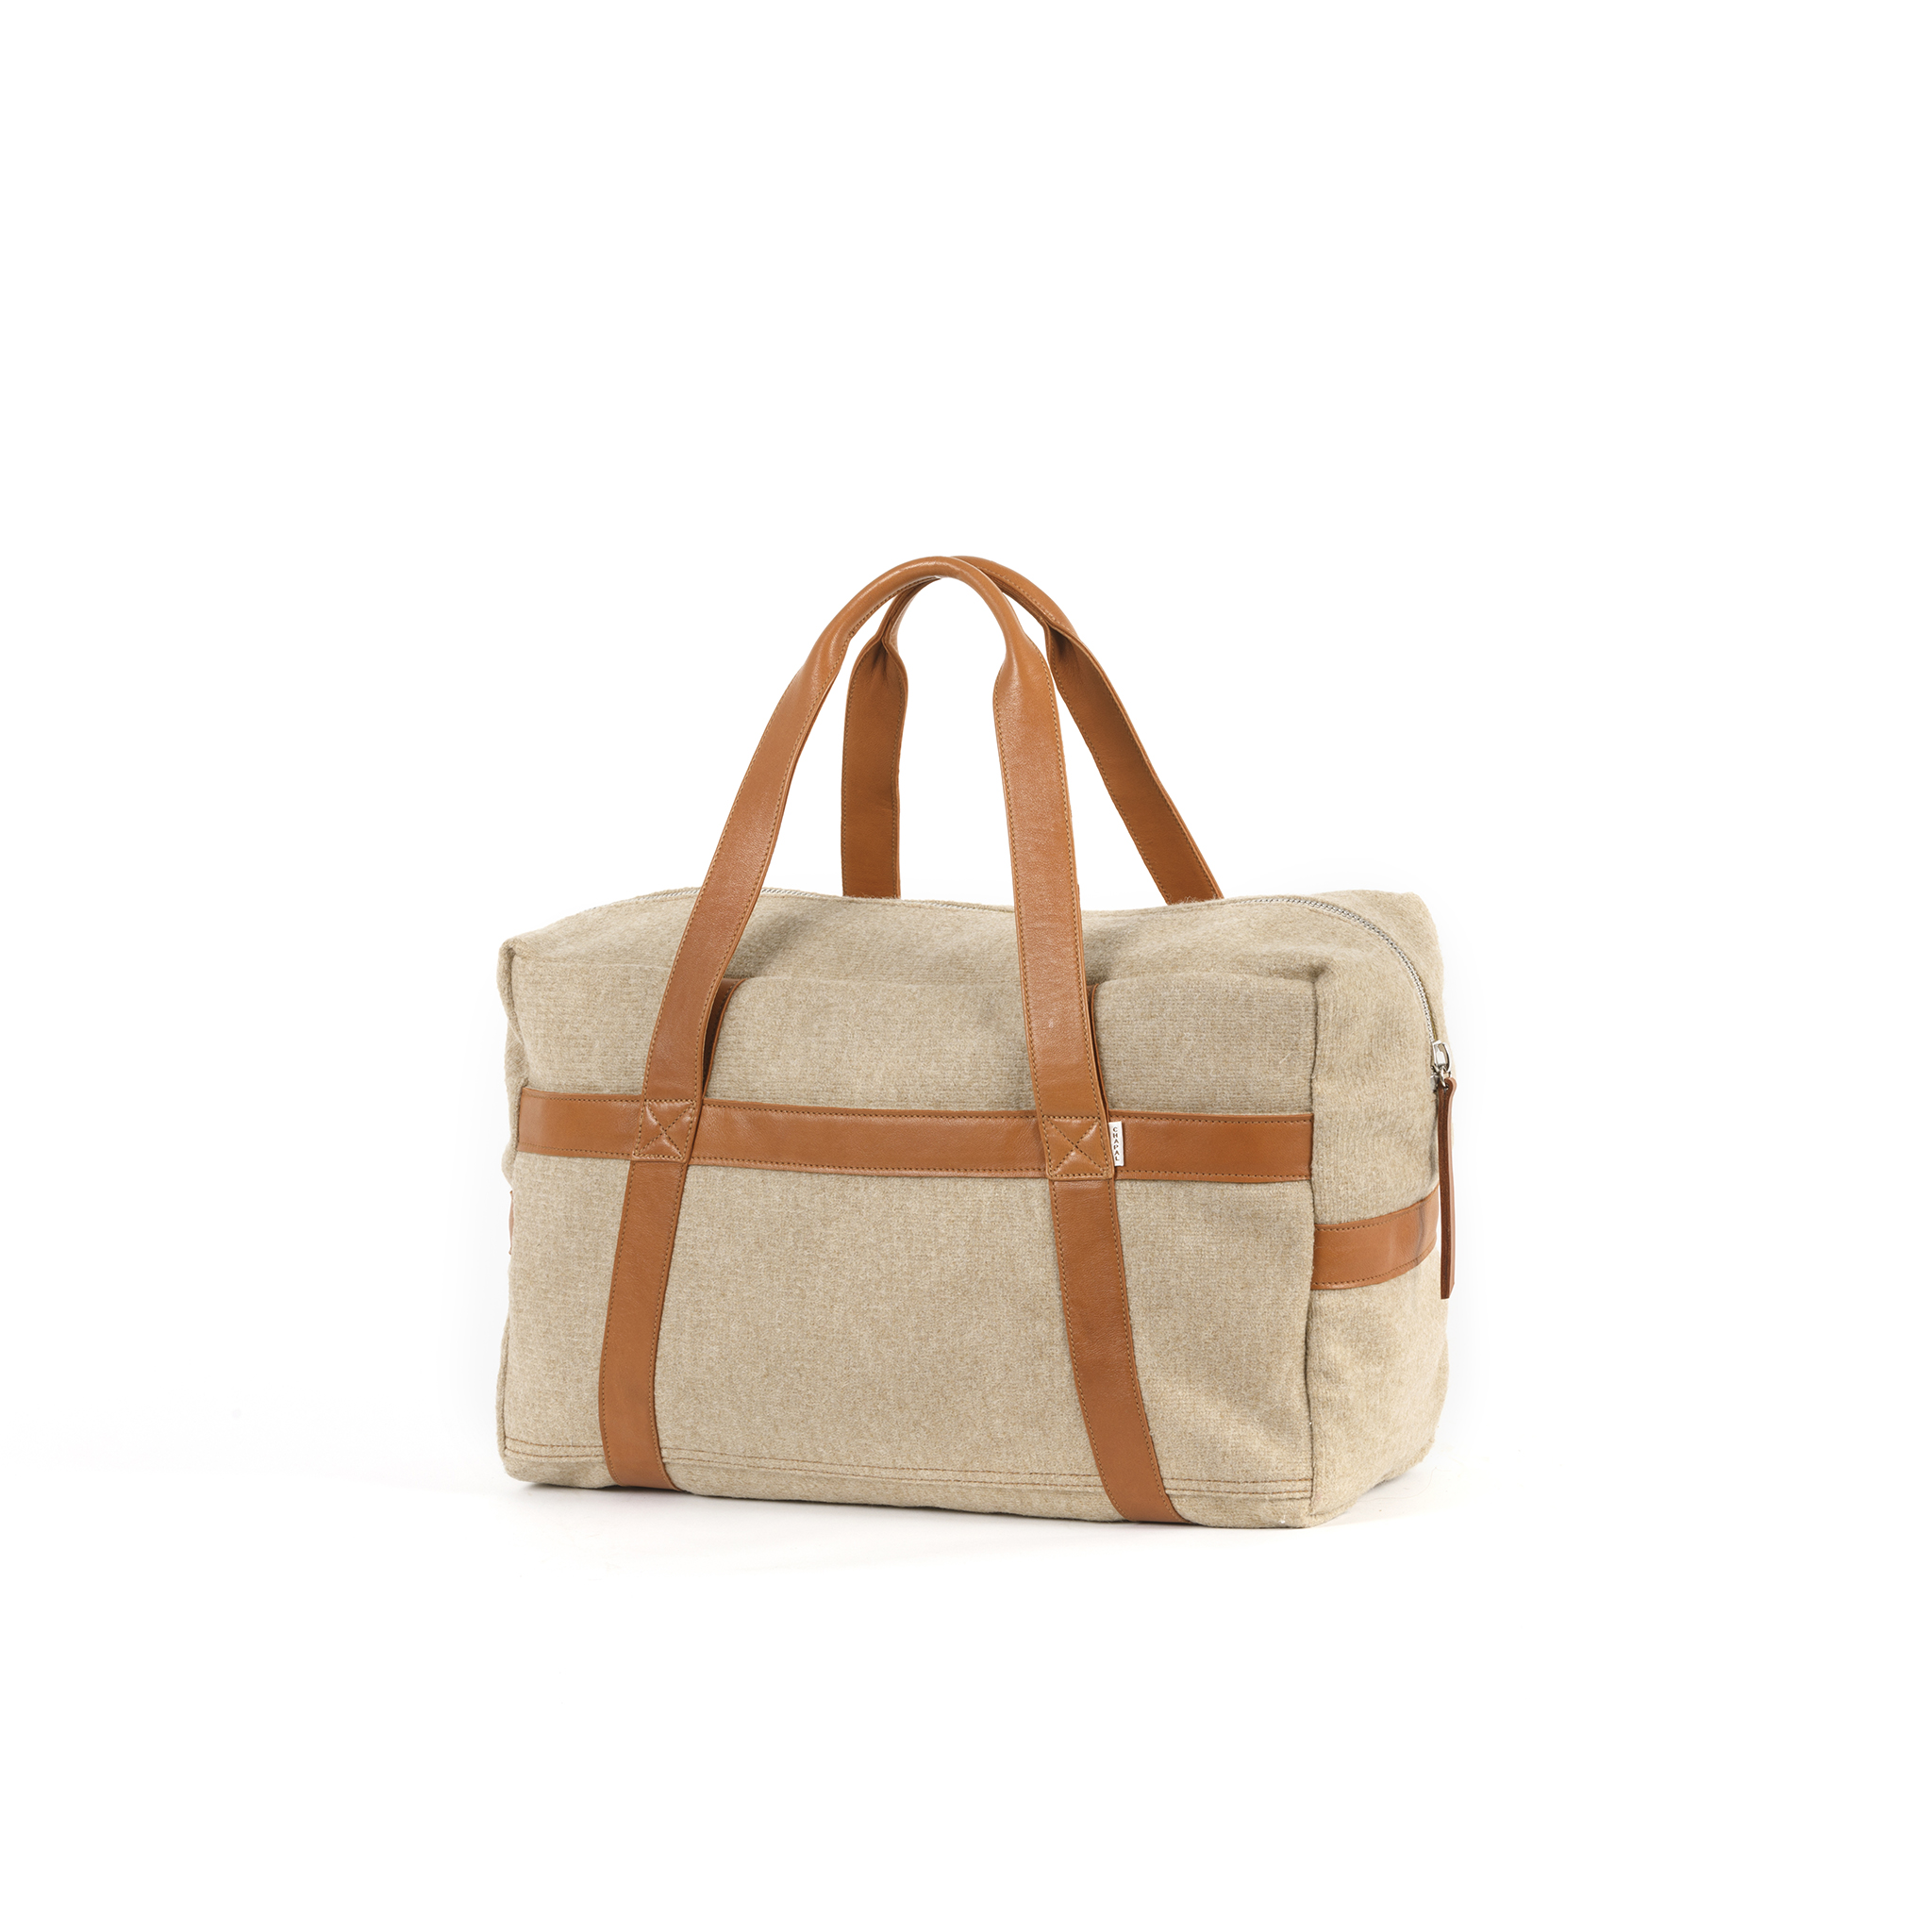 Medium Soft Bag - Merino wool and glossy leather - Beige and tan colors